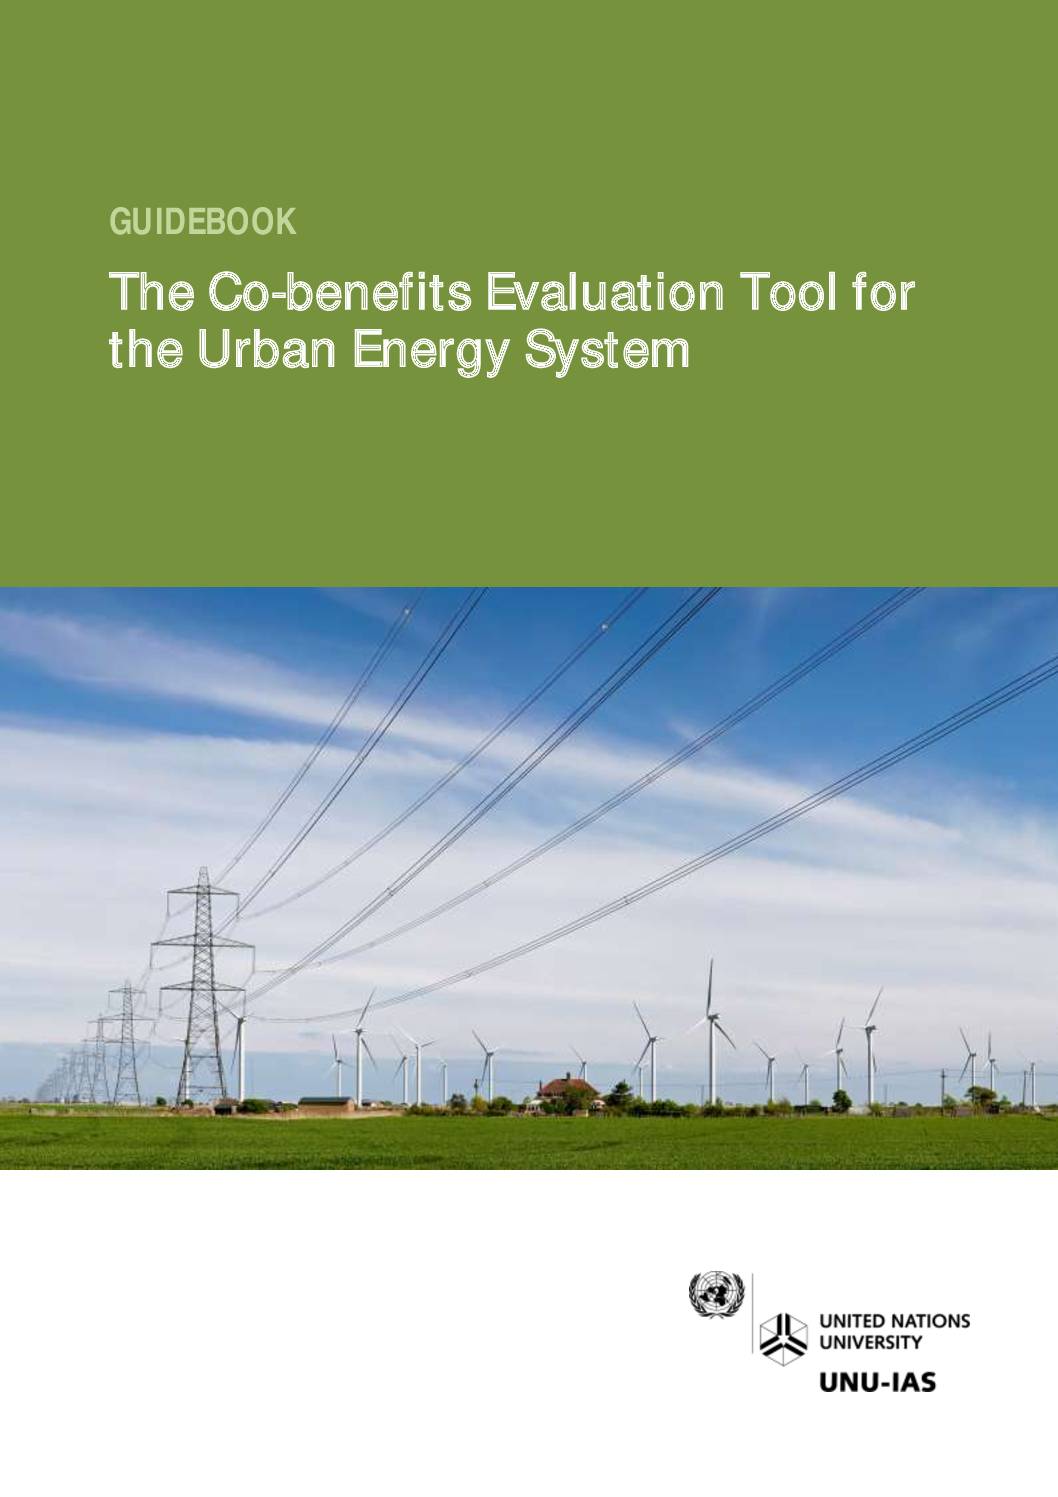 The Co-benefits Evaluation Tool for the Urban Energy System